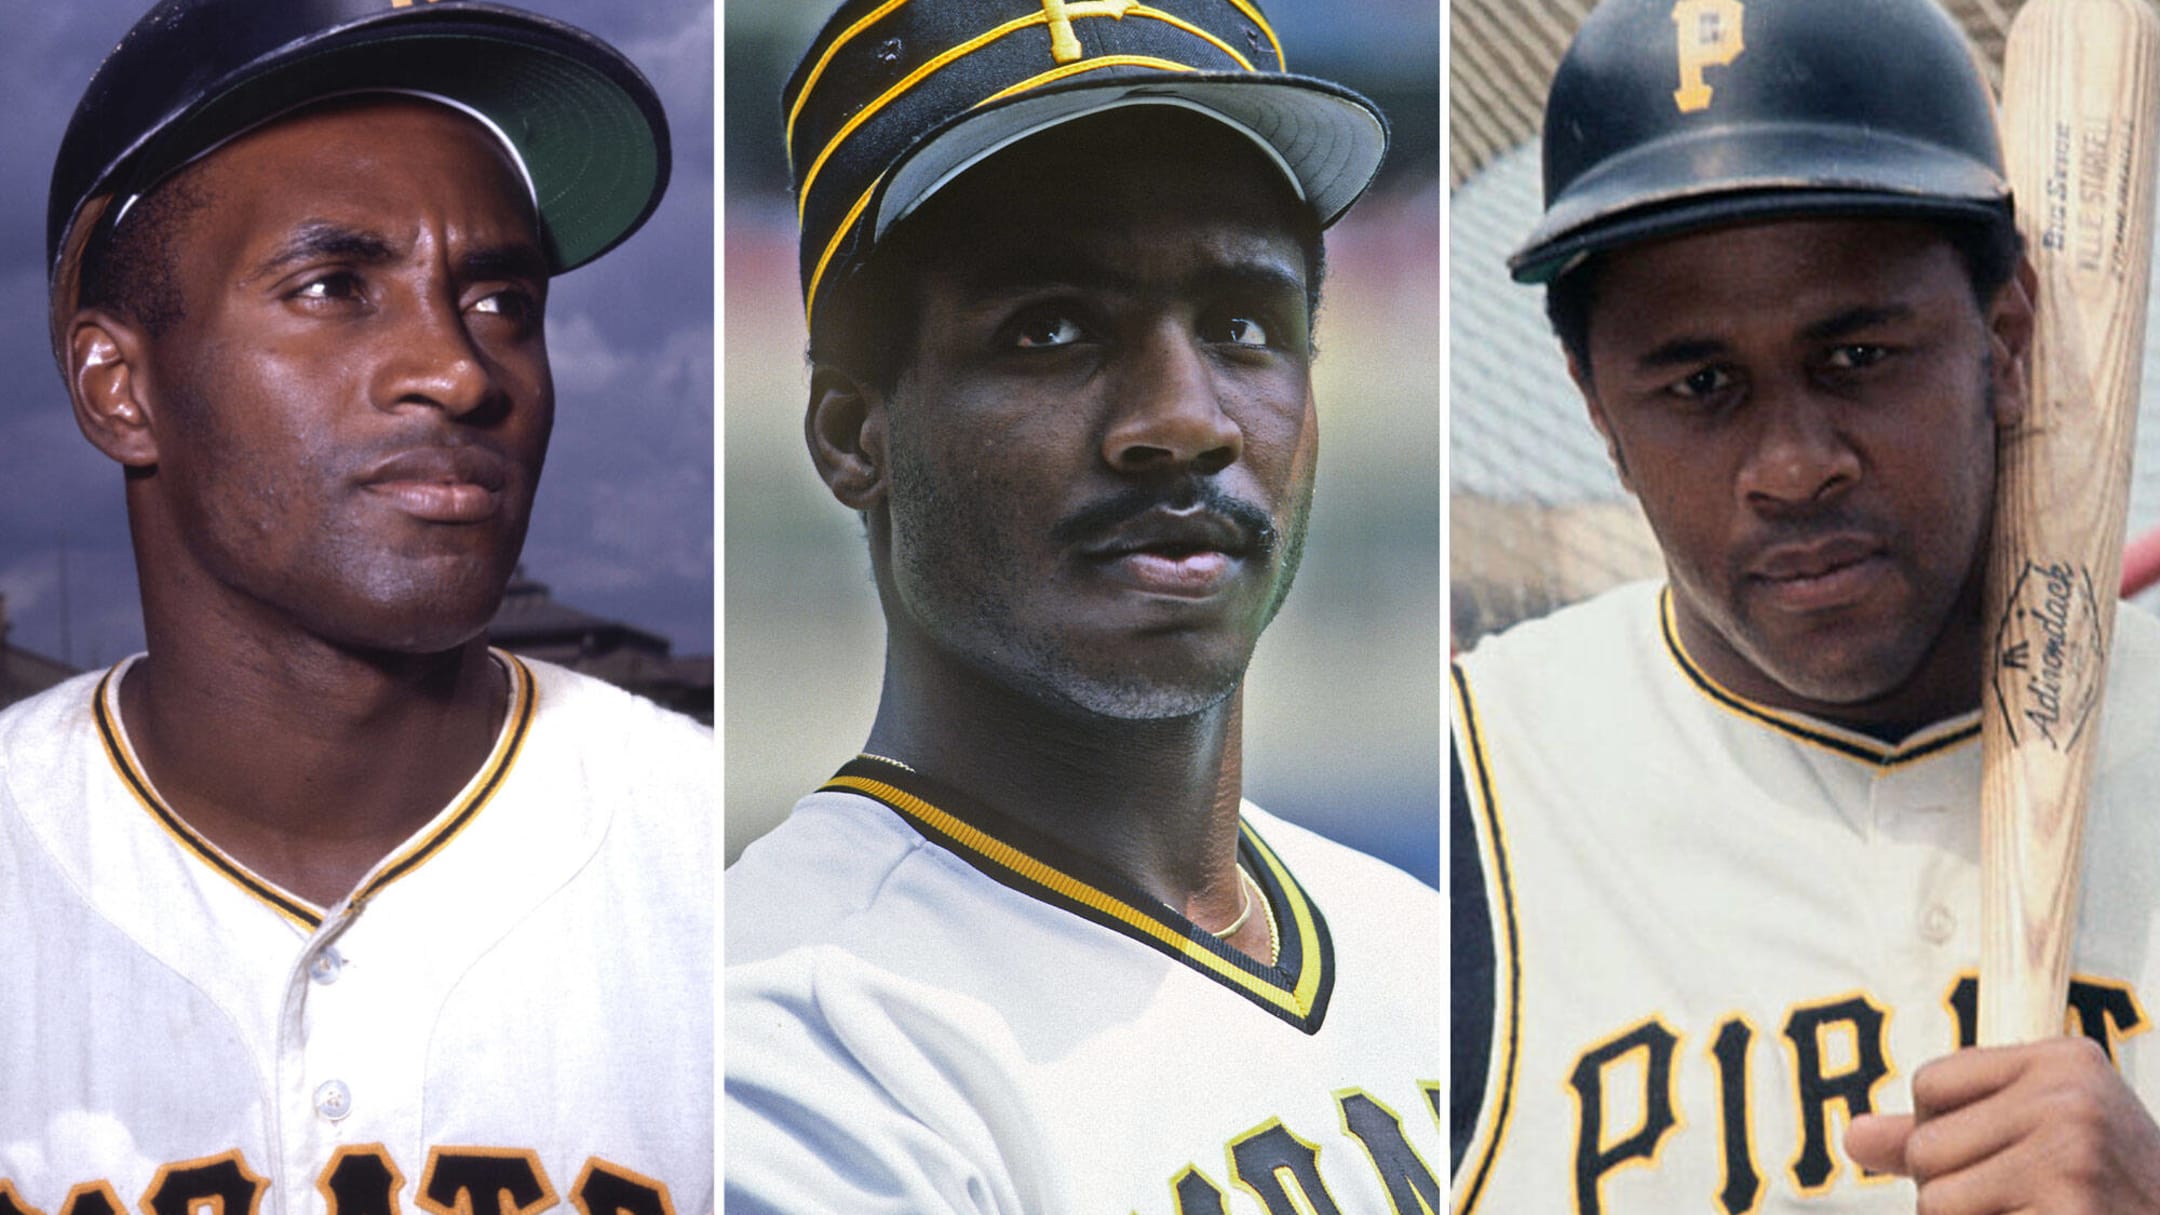 Top Five Catchers in Pittsburgh Pirates Franchise History